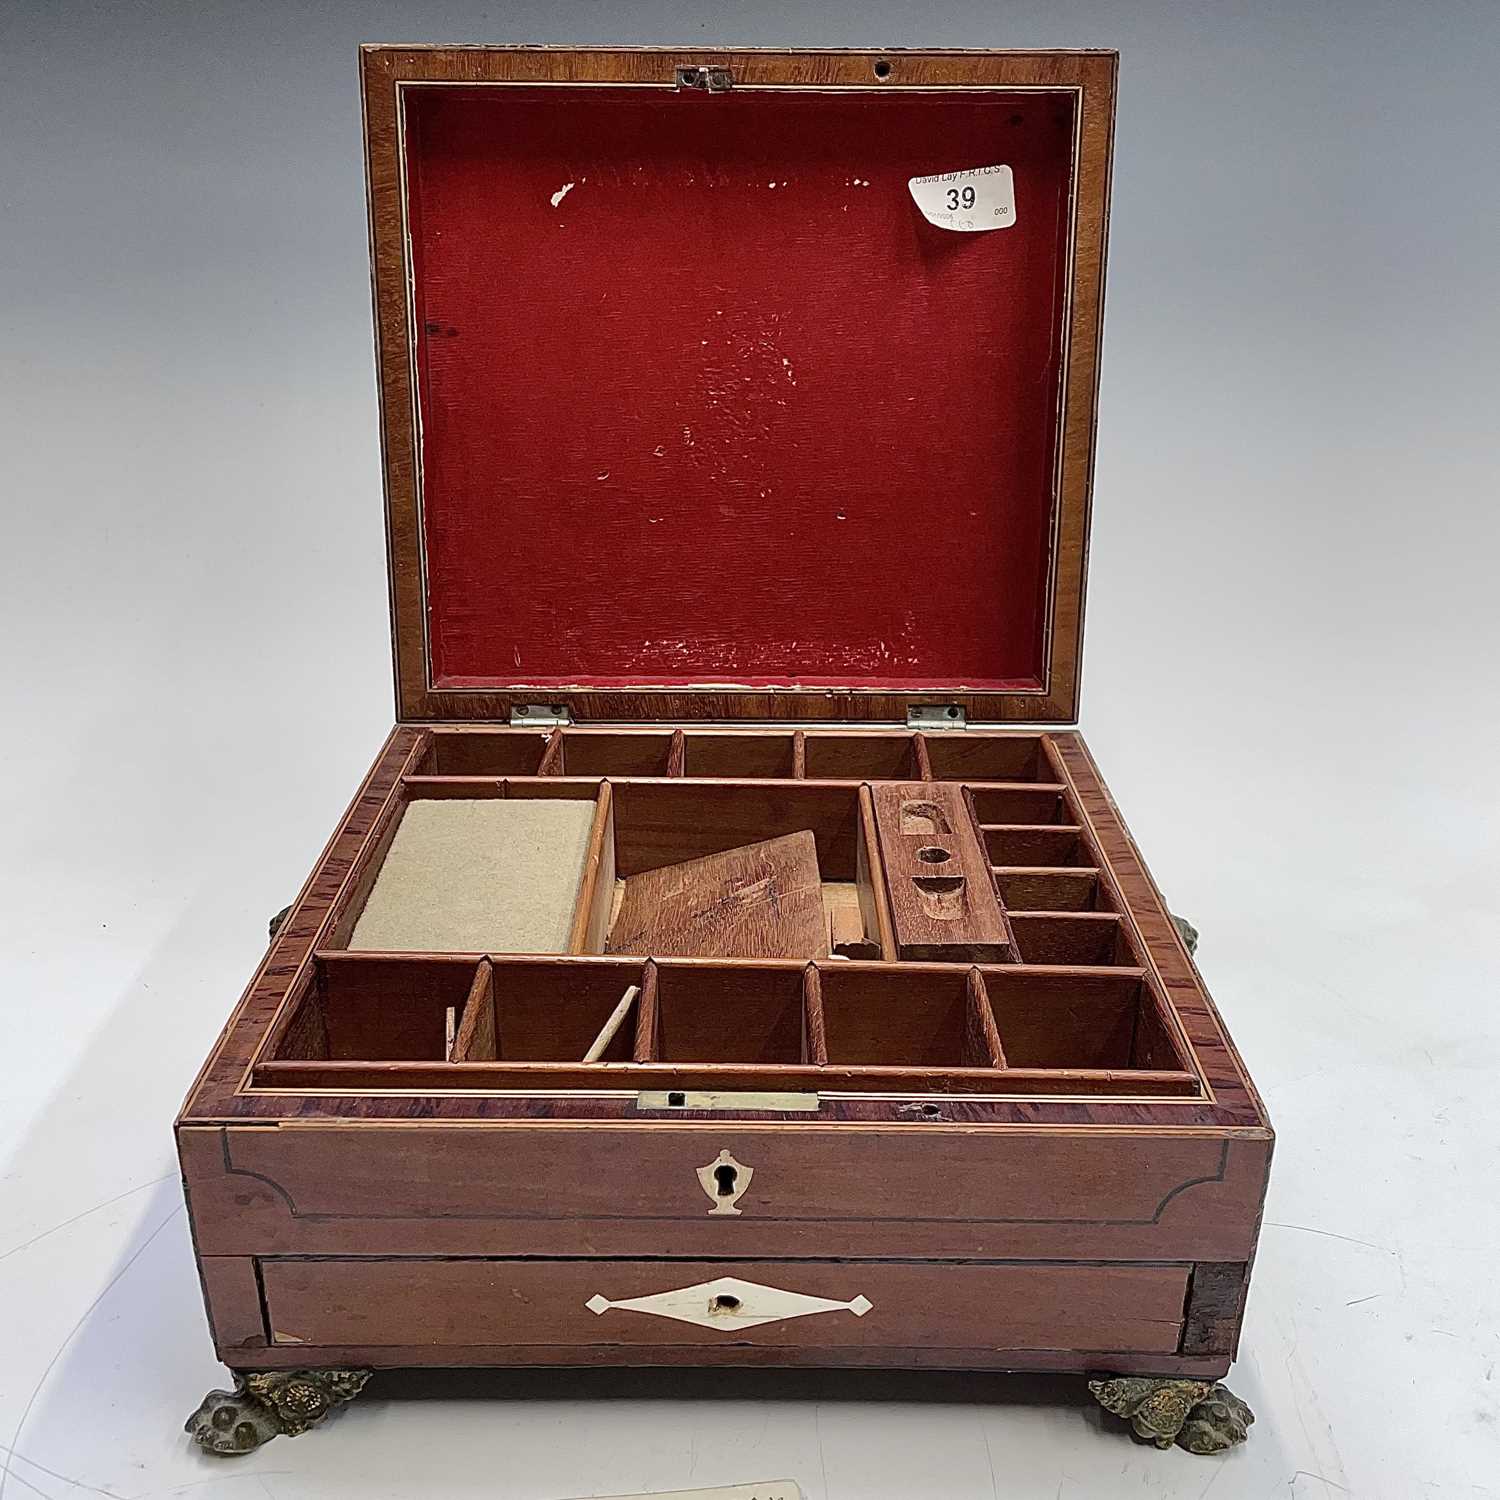 A Regency mahogany inlaid and crossbanded work box, with fitted interior and a lower drawer with - Image 2 of 7